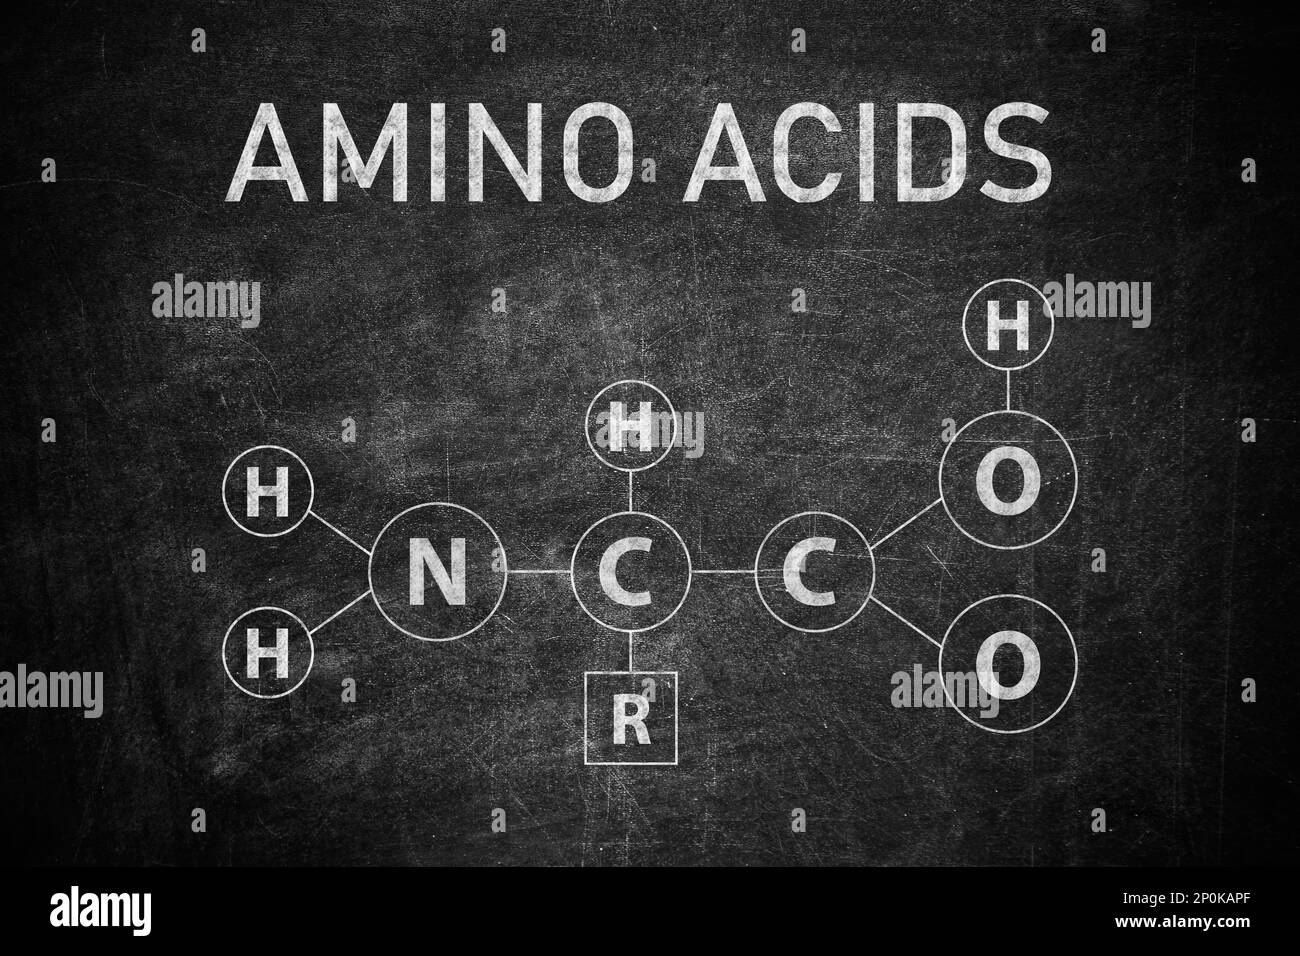 Text AMINO ACIDS and chemical formula written on blackboard Stock Photo